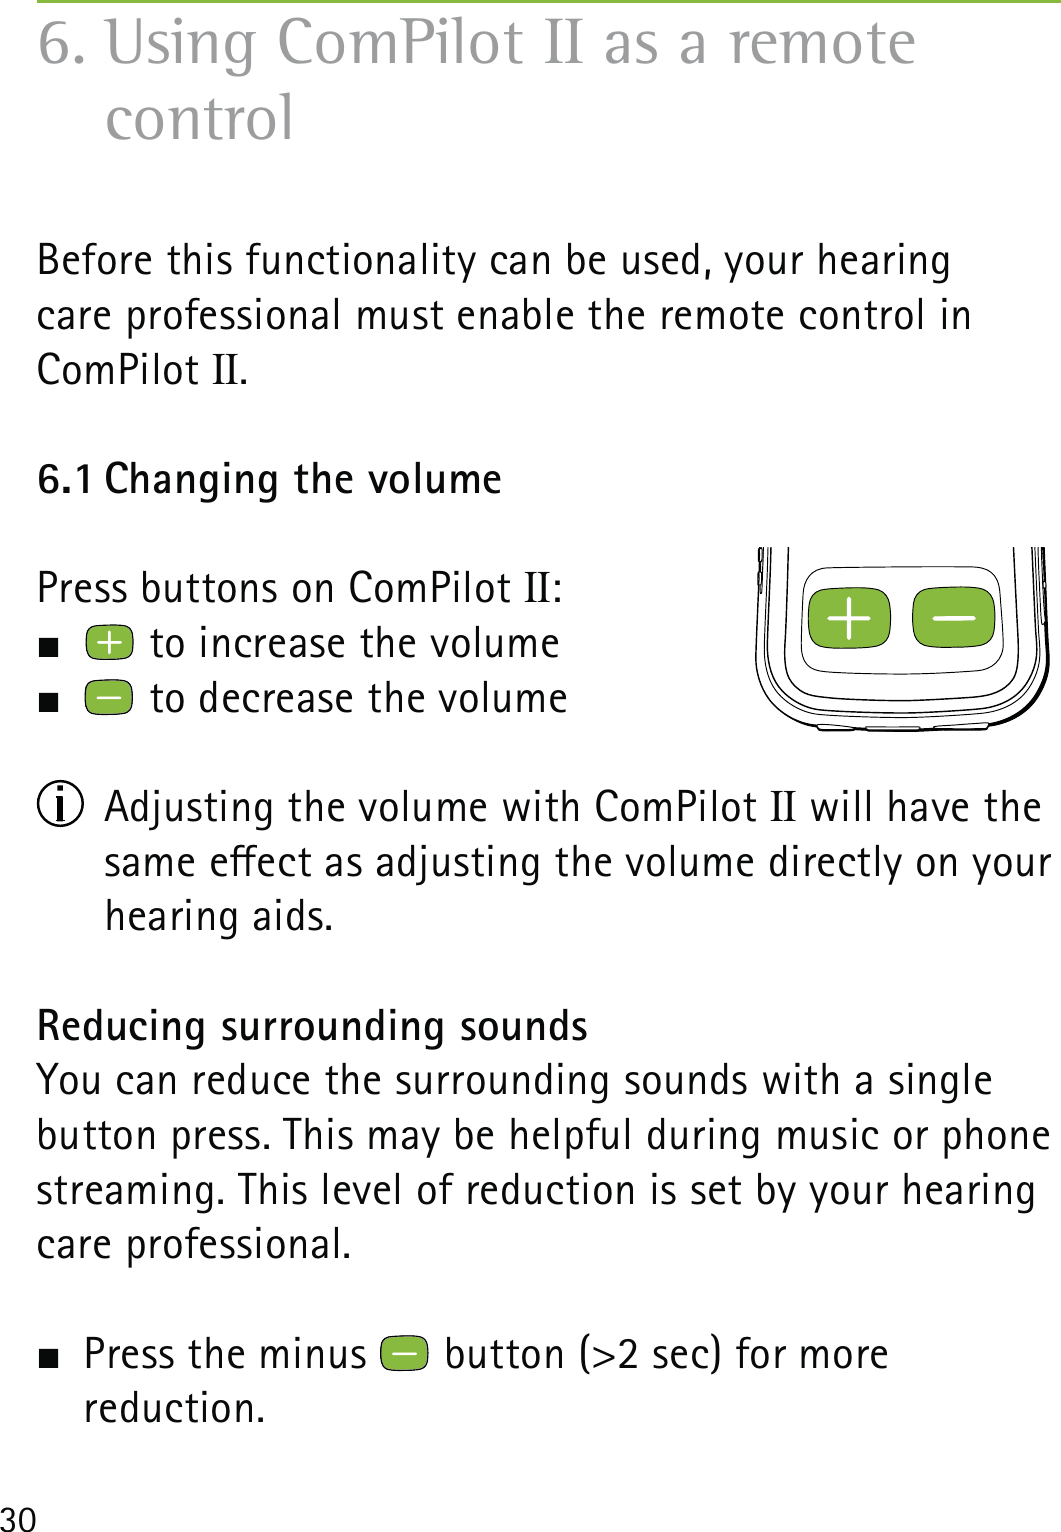 306. Using ComPilot II as a remote  controlBefore this functionality can be used, your hearing  care professional must enable the remote control in ComPilot II.6.1 Changing the volumePress buttons on ComPilot II:   to increase the volume  to decrease the volume  Adjusting the volume with ComPilot II will have the same eect as adjusting the volume directly on your hearing aids. Reducing surrounding soundsYou can reduce the surrounding sounds with a single button press. This may be helpful during music or phone streaming. This level of reduction is set by your hearing care professional.  Press the minus   button (&gt;2 sec) for more  reduction.